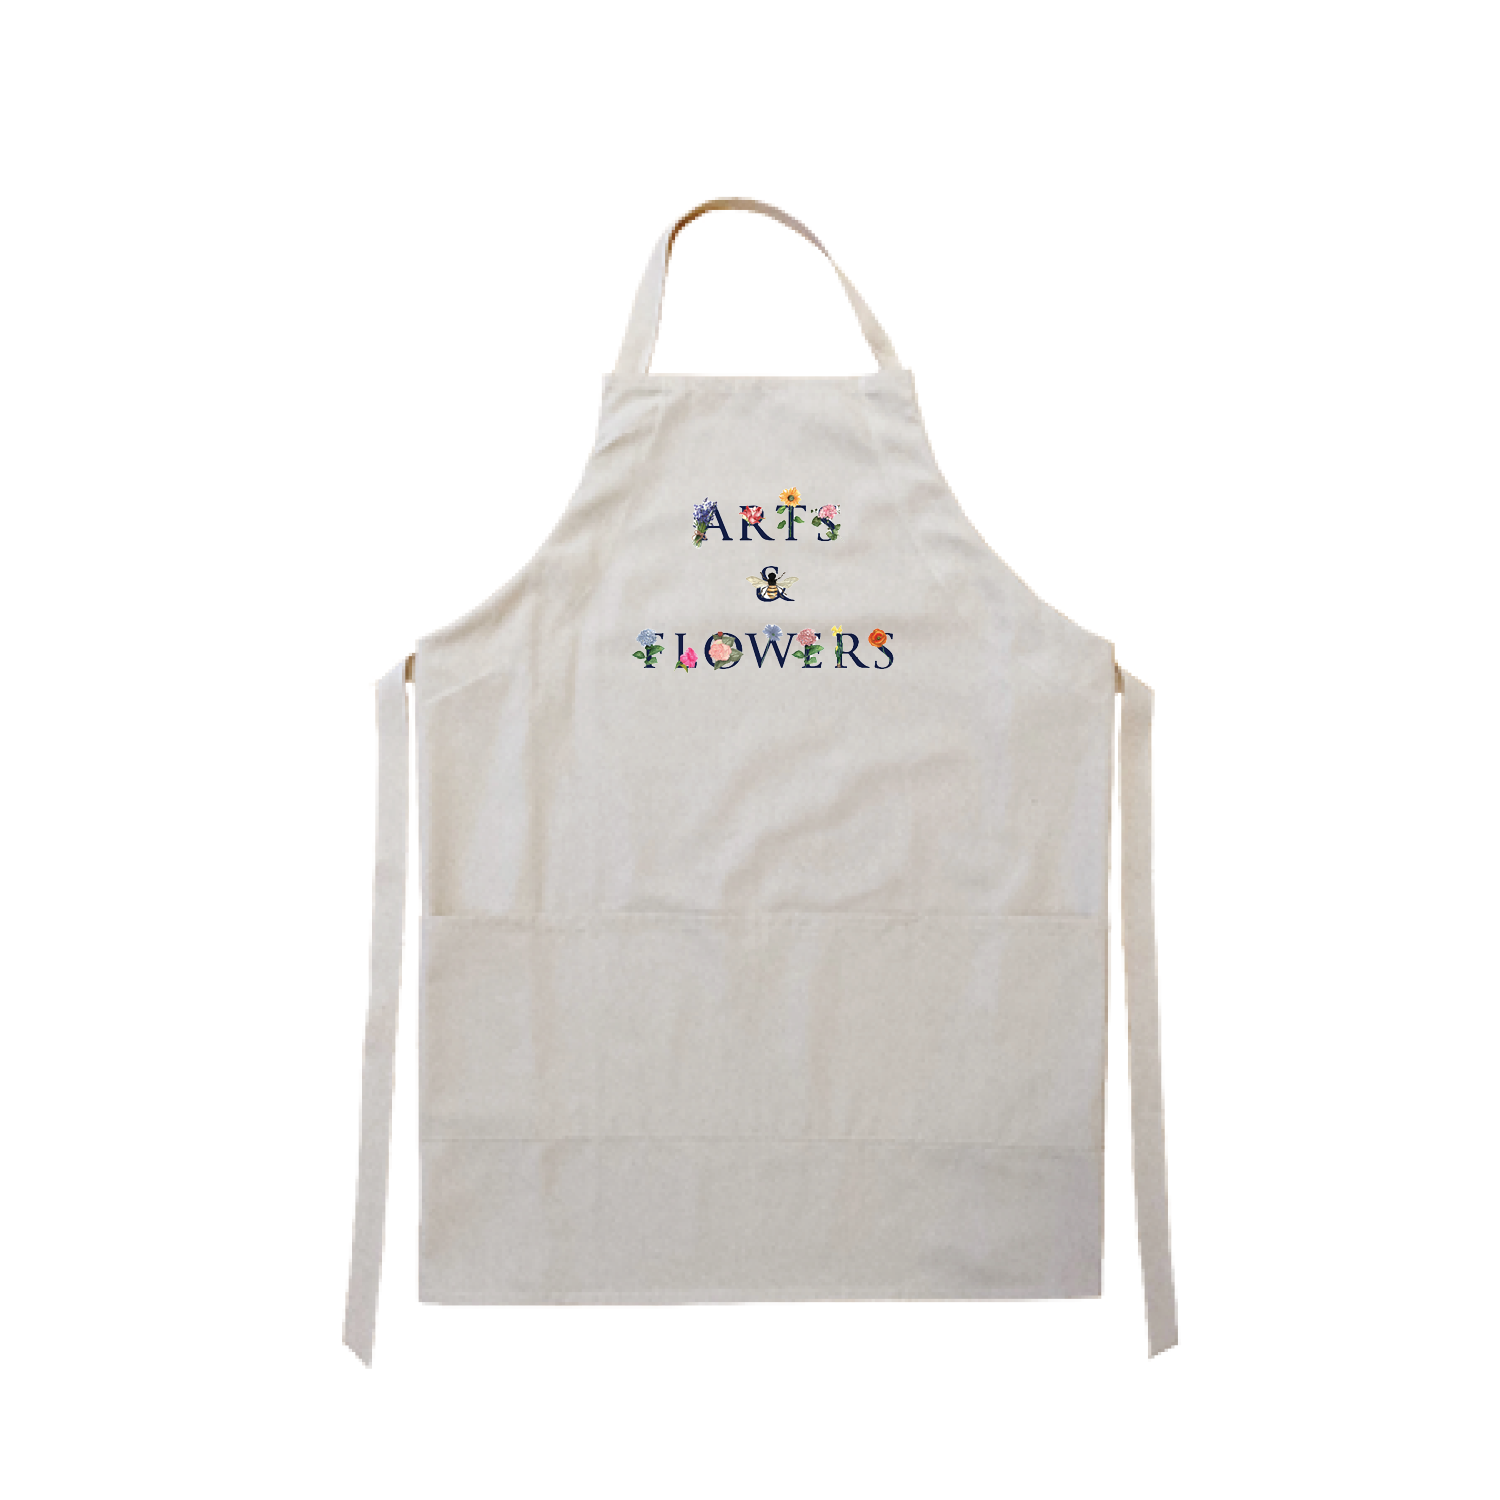 Arts and Flowers apron